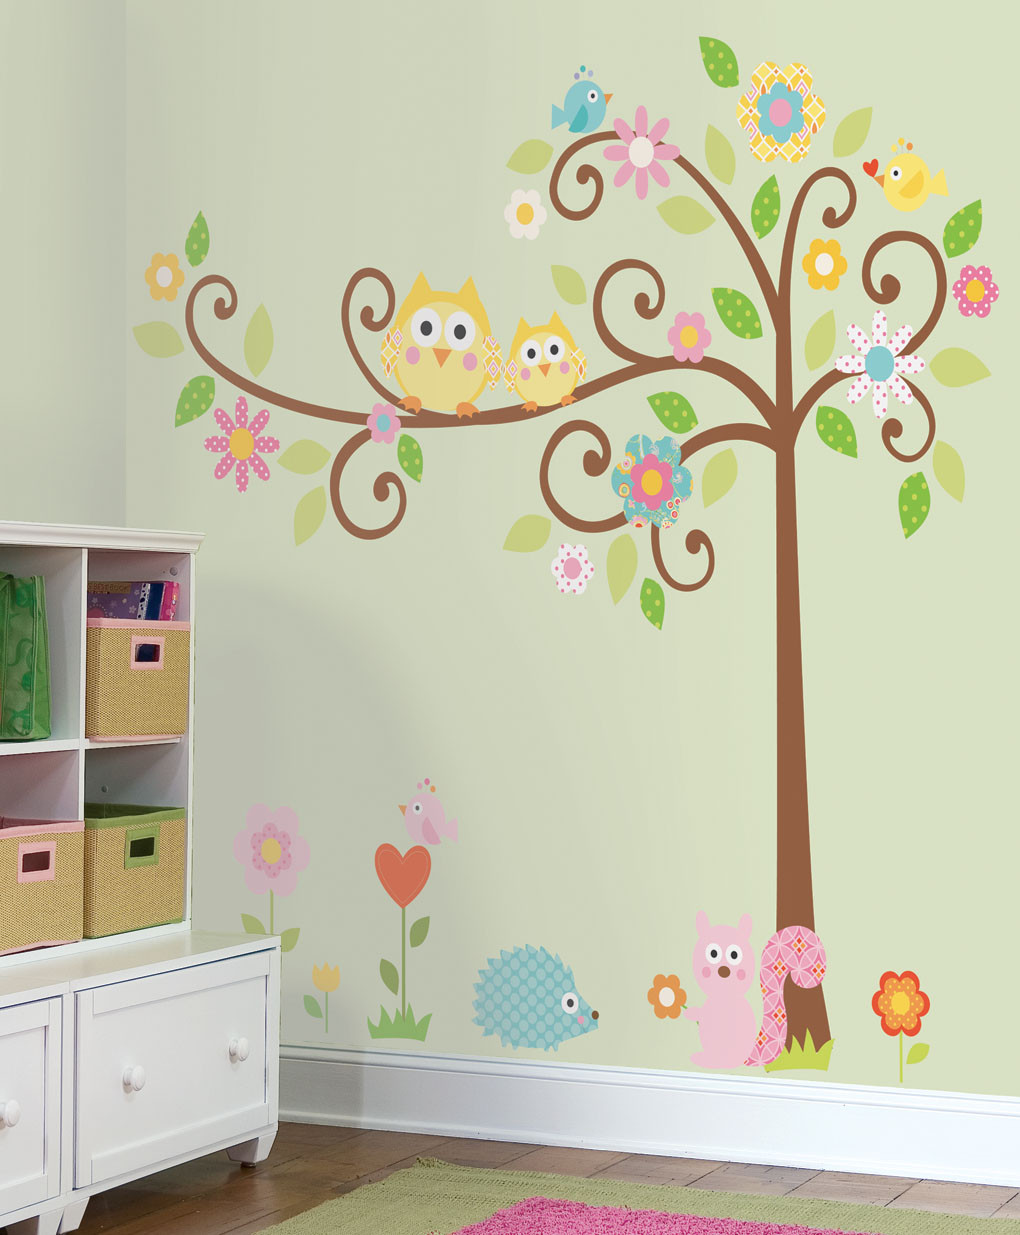 Wall Stickers For Kids Room
 Owl Wall Decals